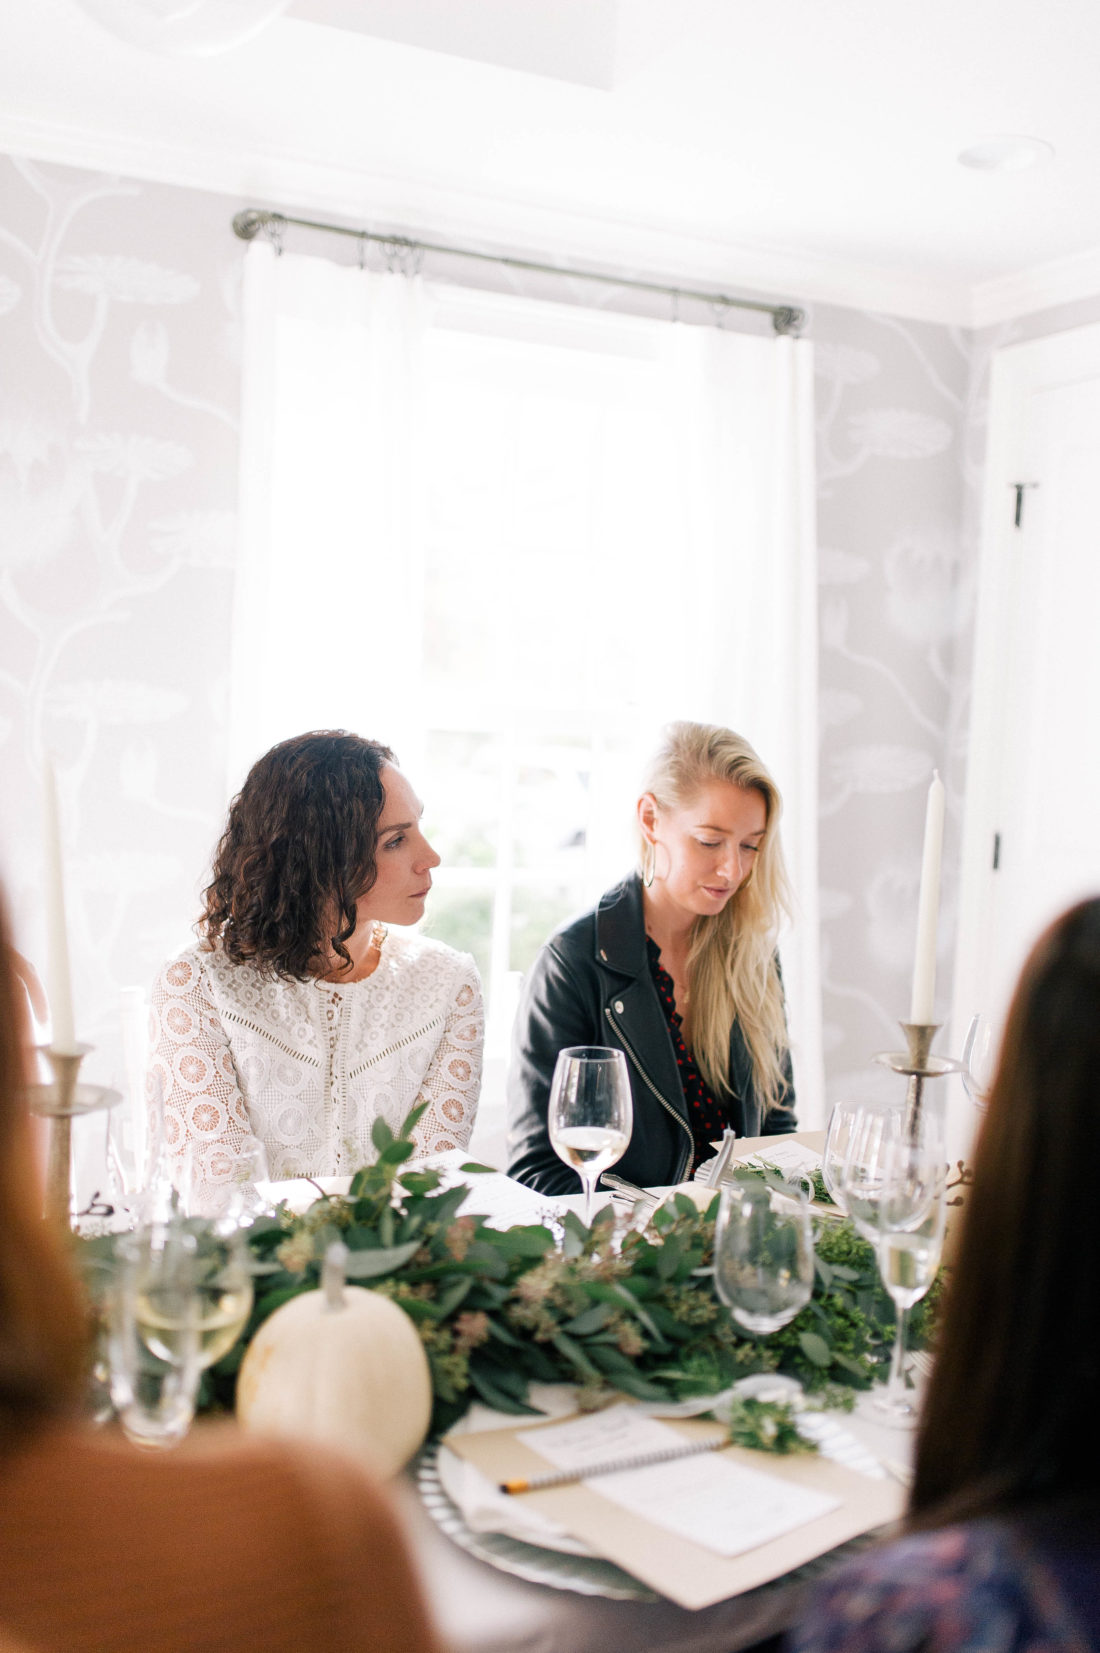 Guests listen as Eva Amurri Martino speaks about her involvement with No Kid Hungry for Friendsgiving